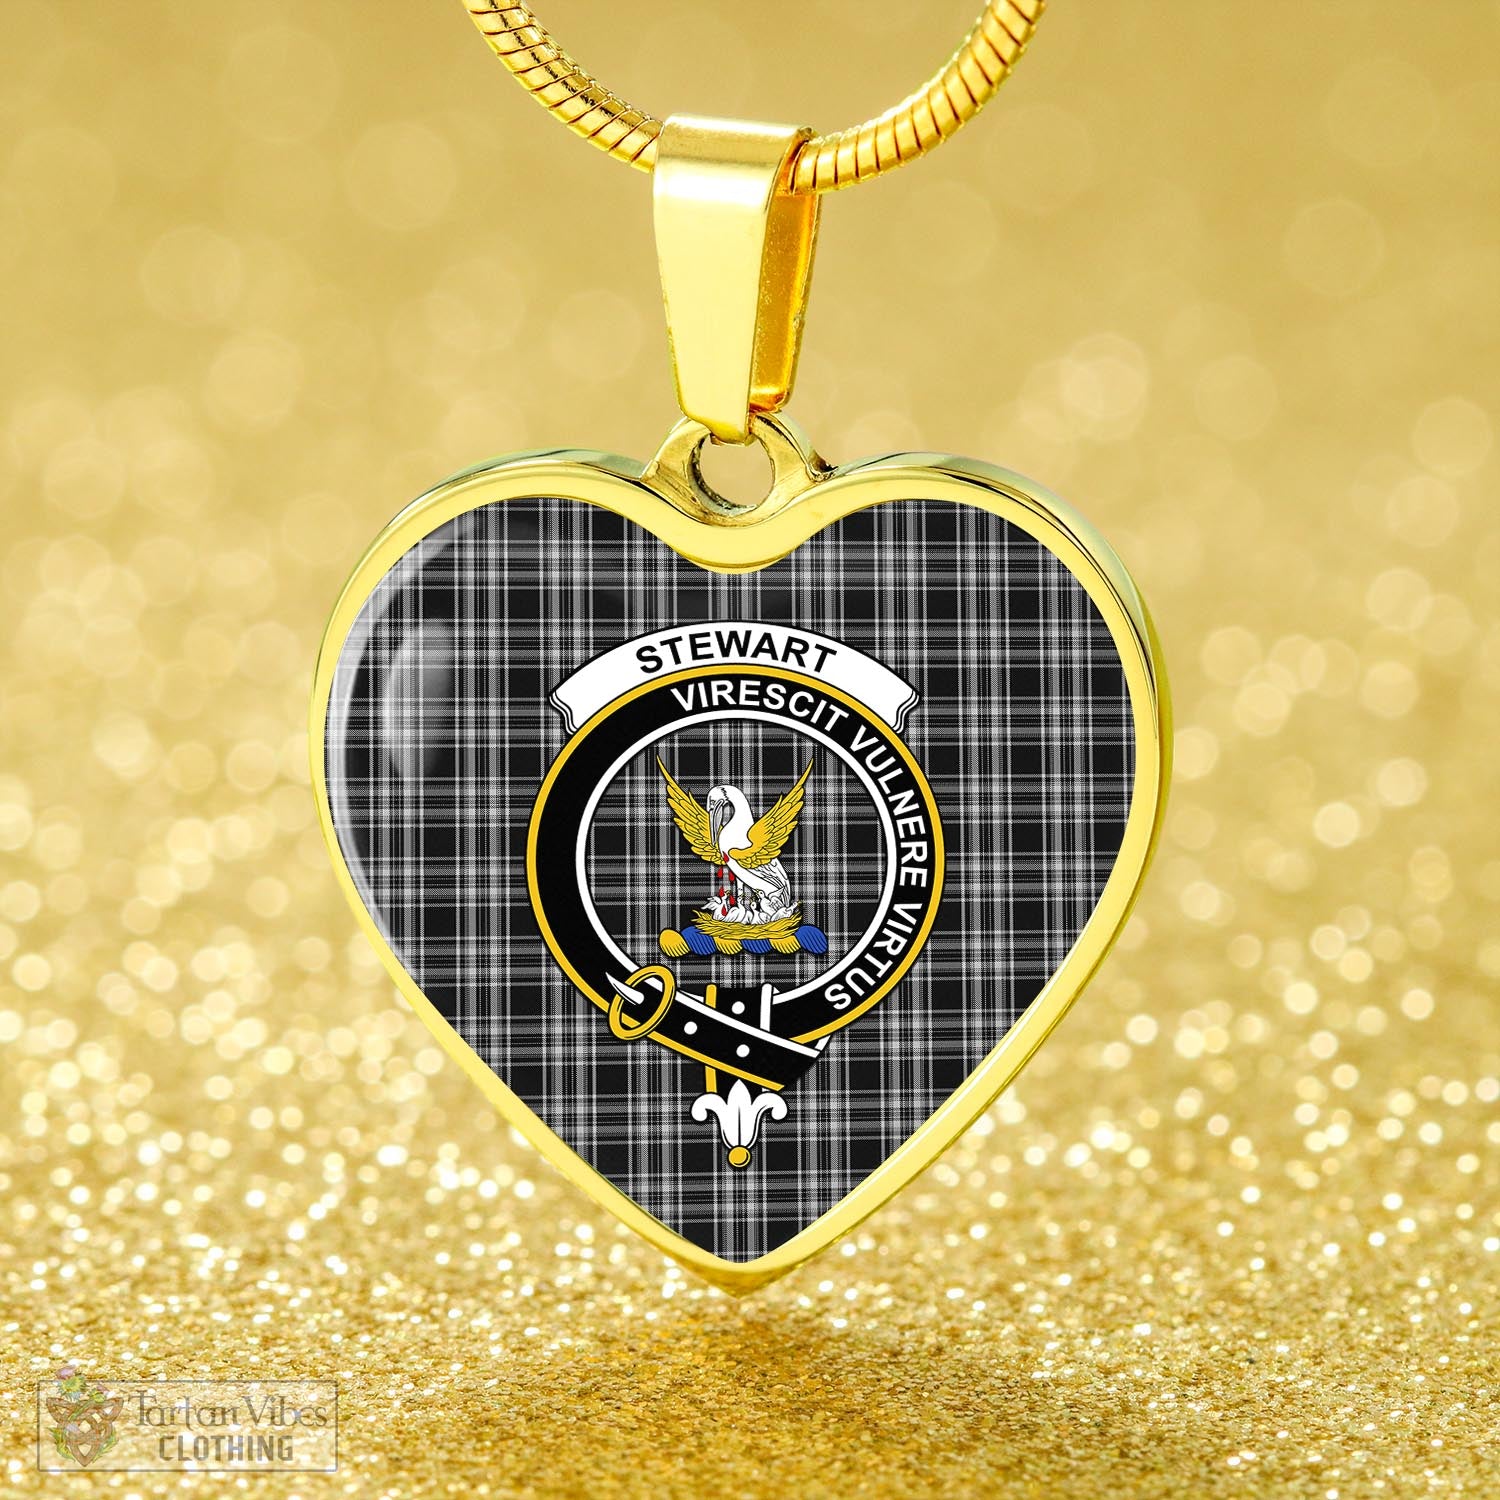 Tartan Vibes Clothing Stewart Black and White Tartan Heart Necklace with Family Crest